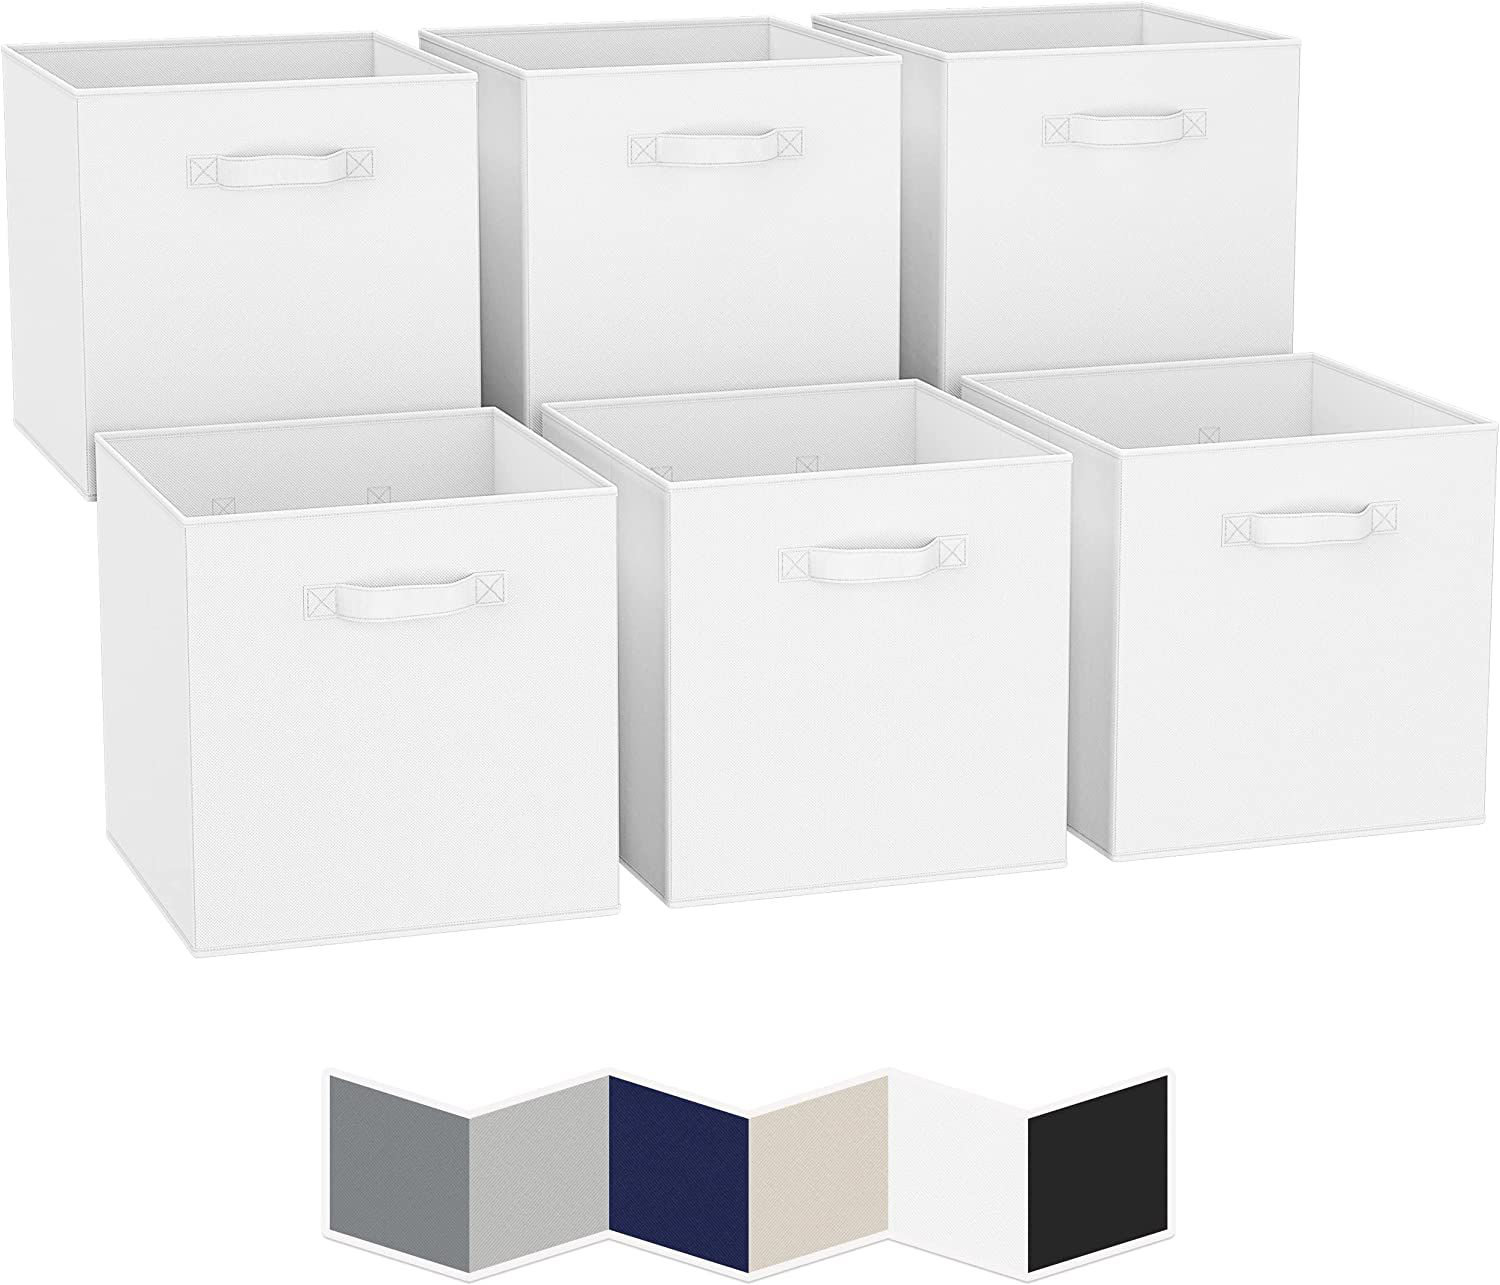 Mighty Rock Fabric Storage Cubes Storage Bins Organization Boxes Closet  Organizers Baskets Foldable with Handle for Shelves Gray 6 Pack